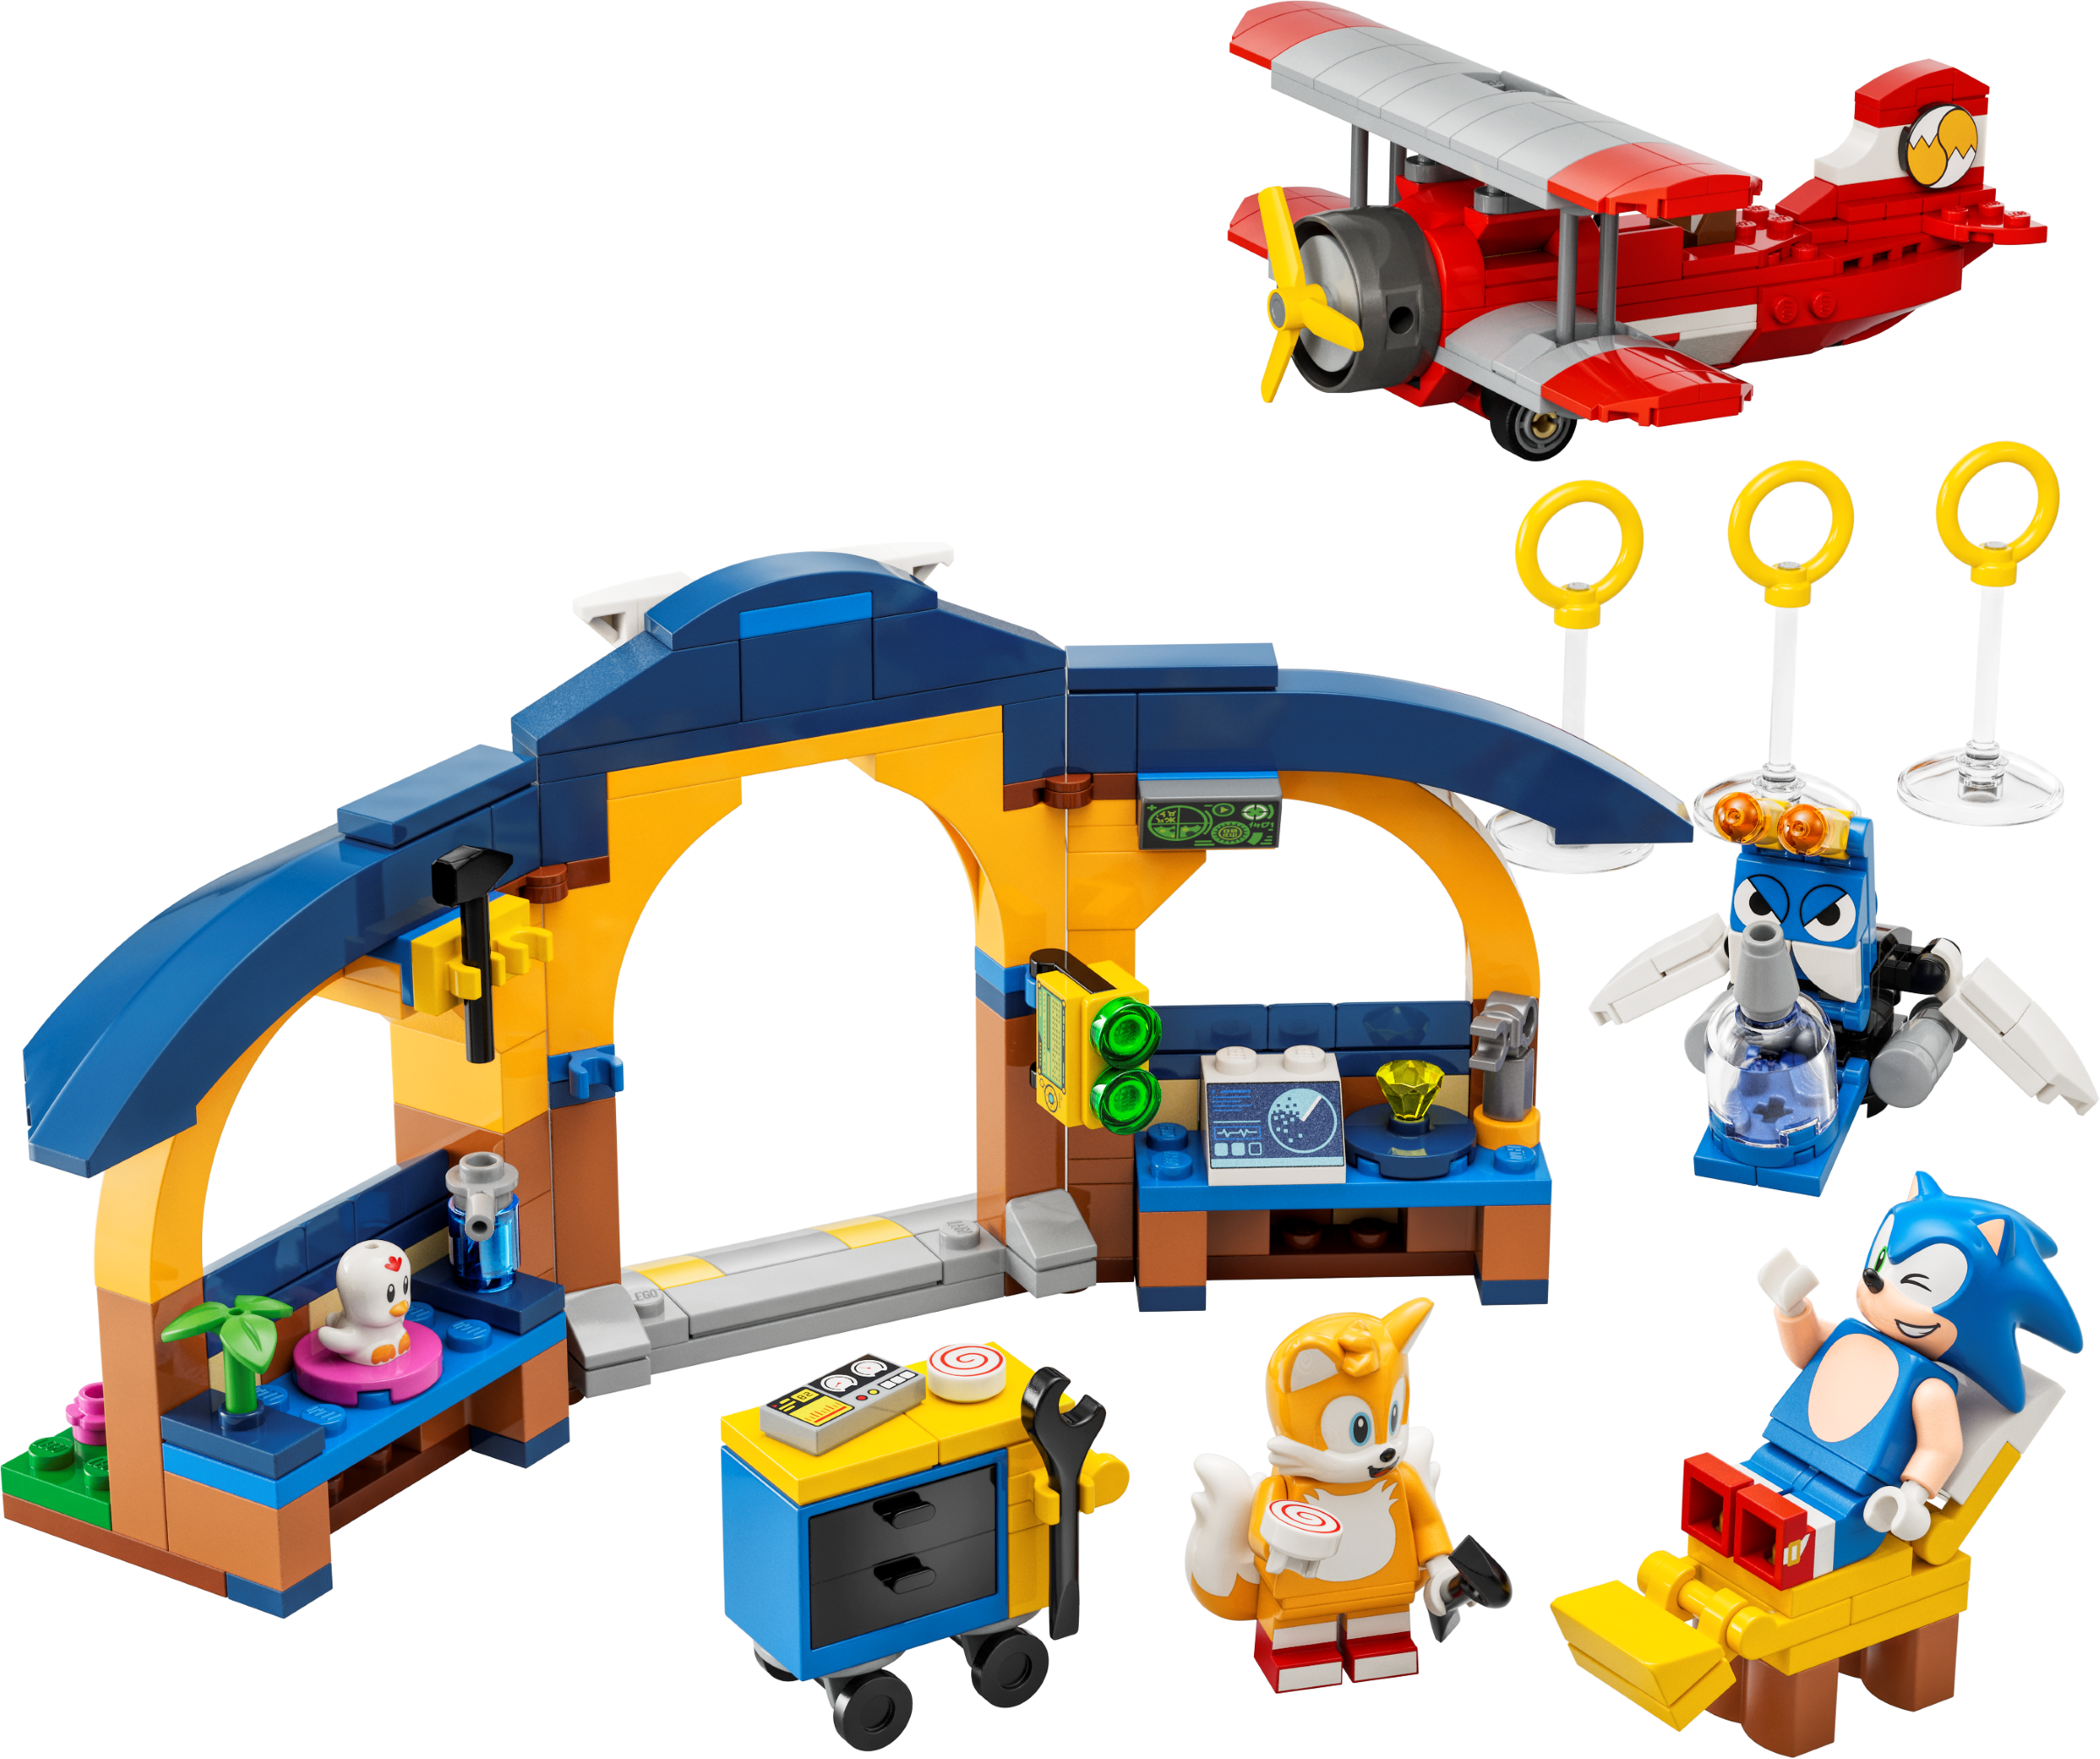 Tails' Workshop and Tornado Plane 76991 | LEGO® Sonic the Hedgehog™ | Buy  online at the Official LEGO® Shop US